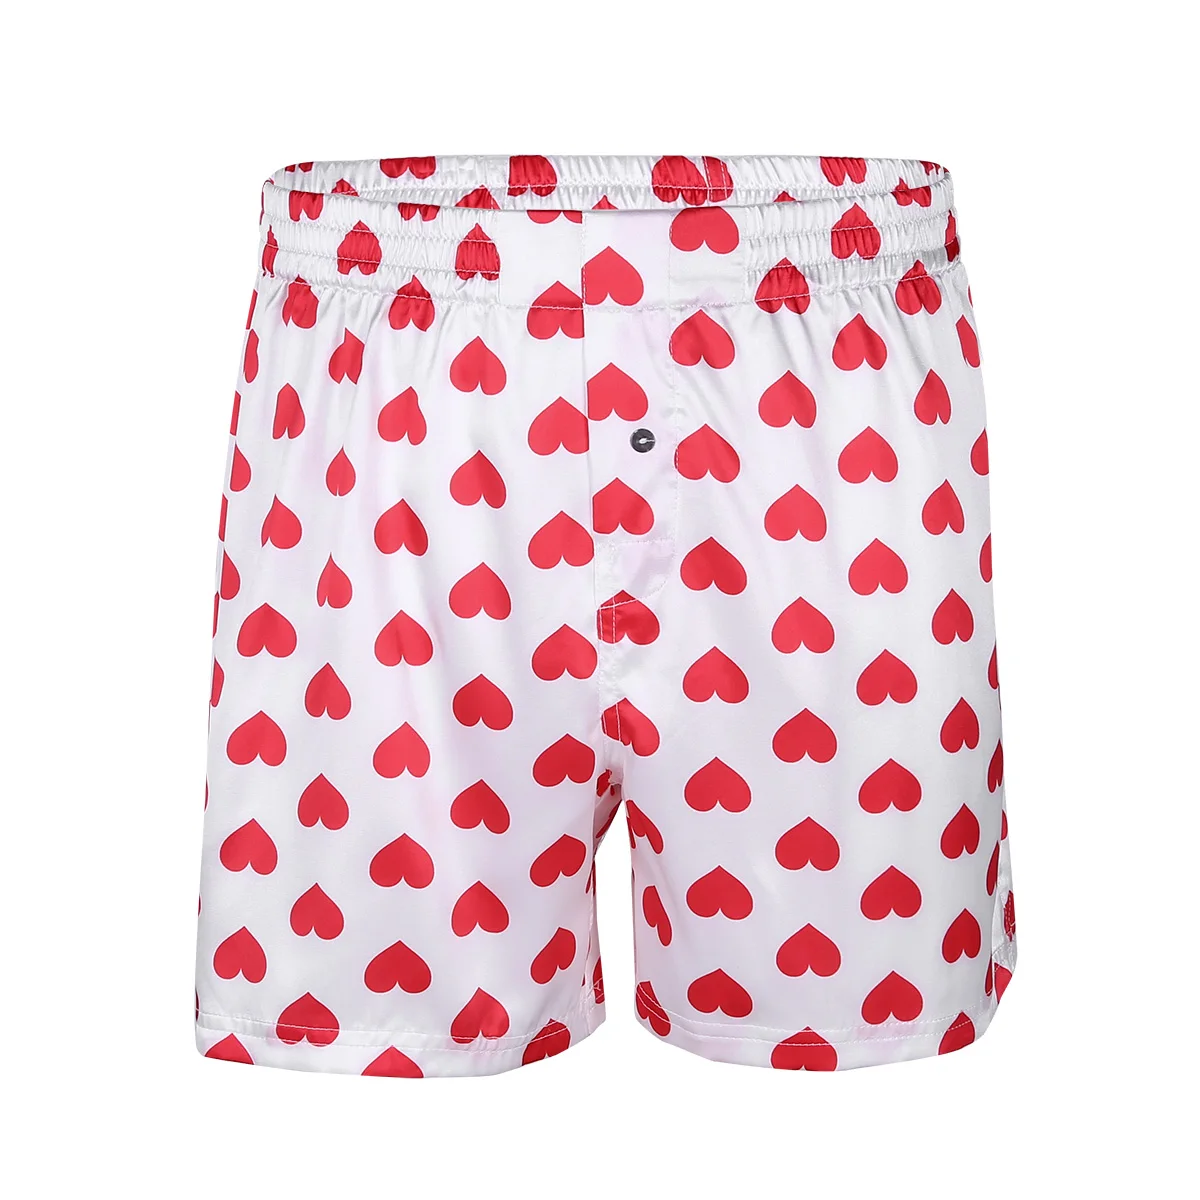 dPois Mens Love Heart Print Summer Satin Boxers Shorts Loose Sports Lounge Underwear 